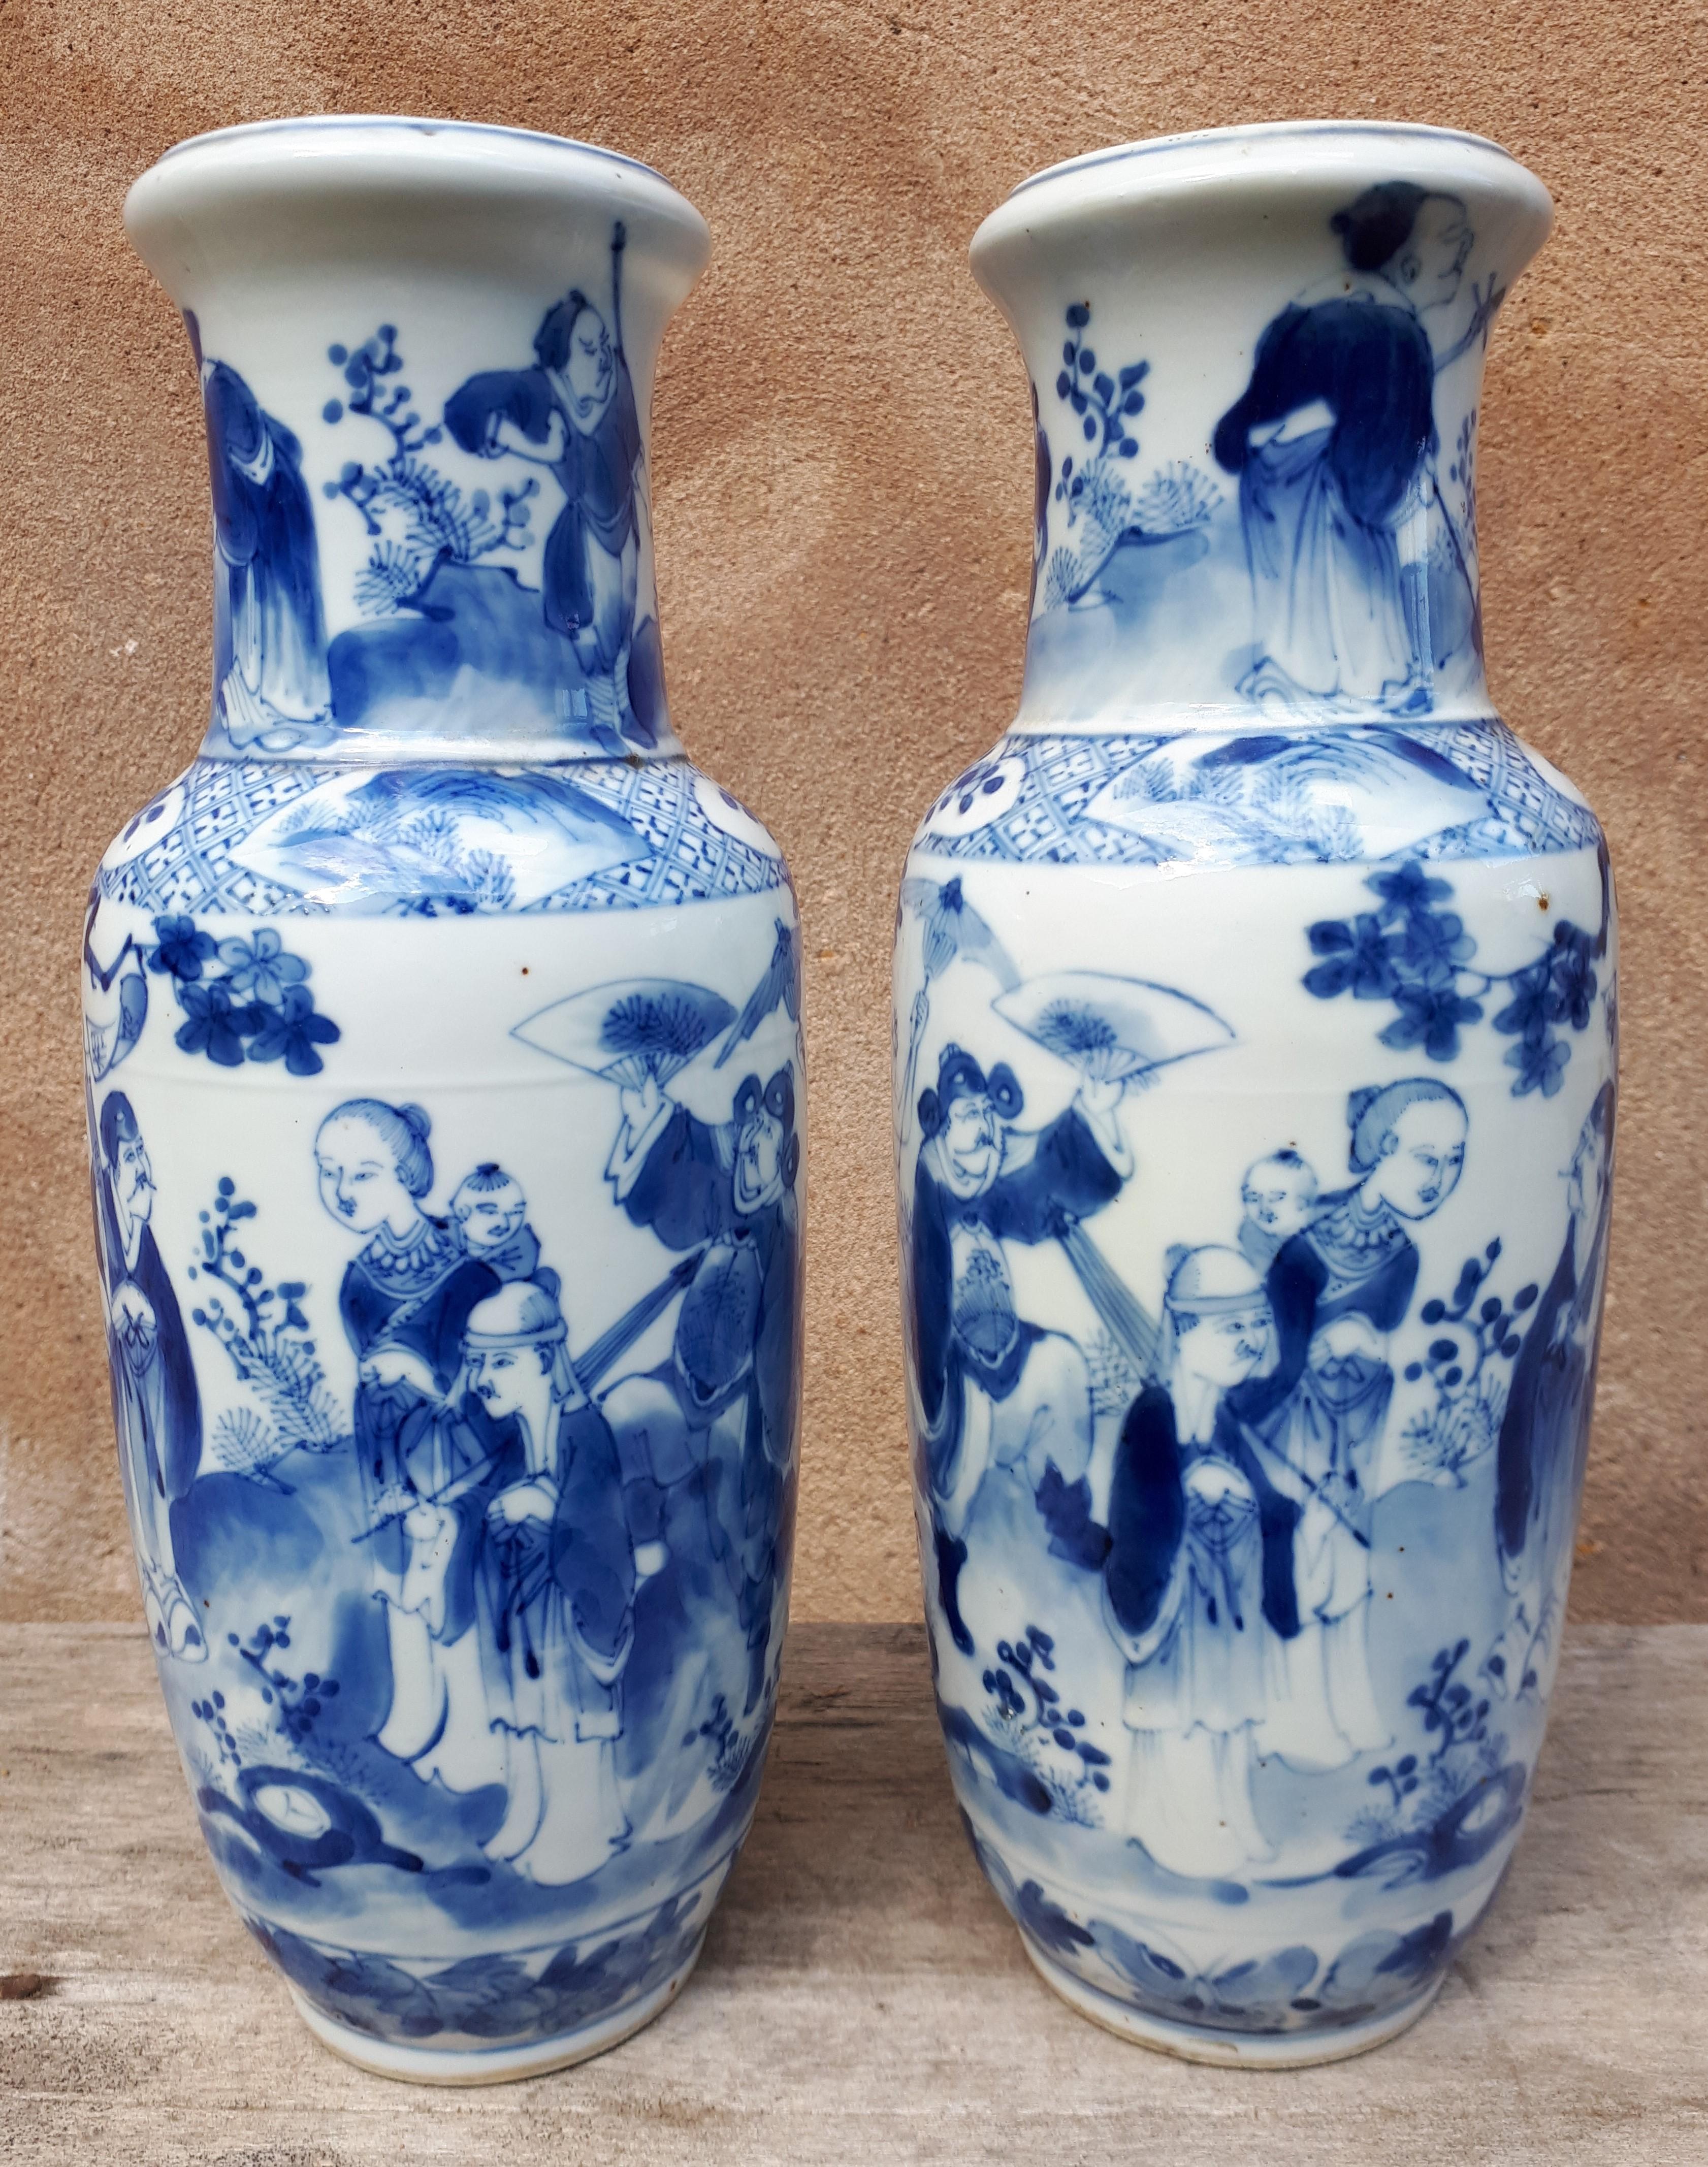 Pair of porcelain vases with mirror decoration of characters in a garden.
Very good condition.
Xuande mark under each base.
19th century China.